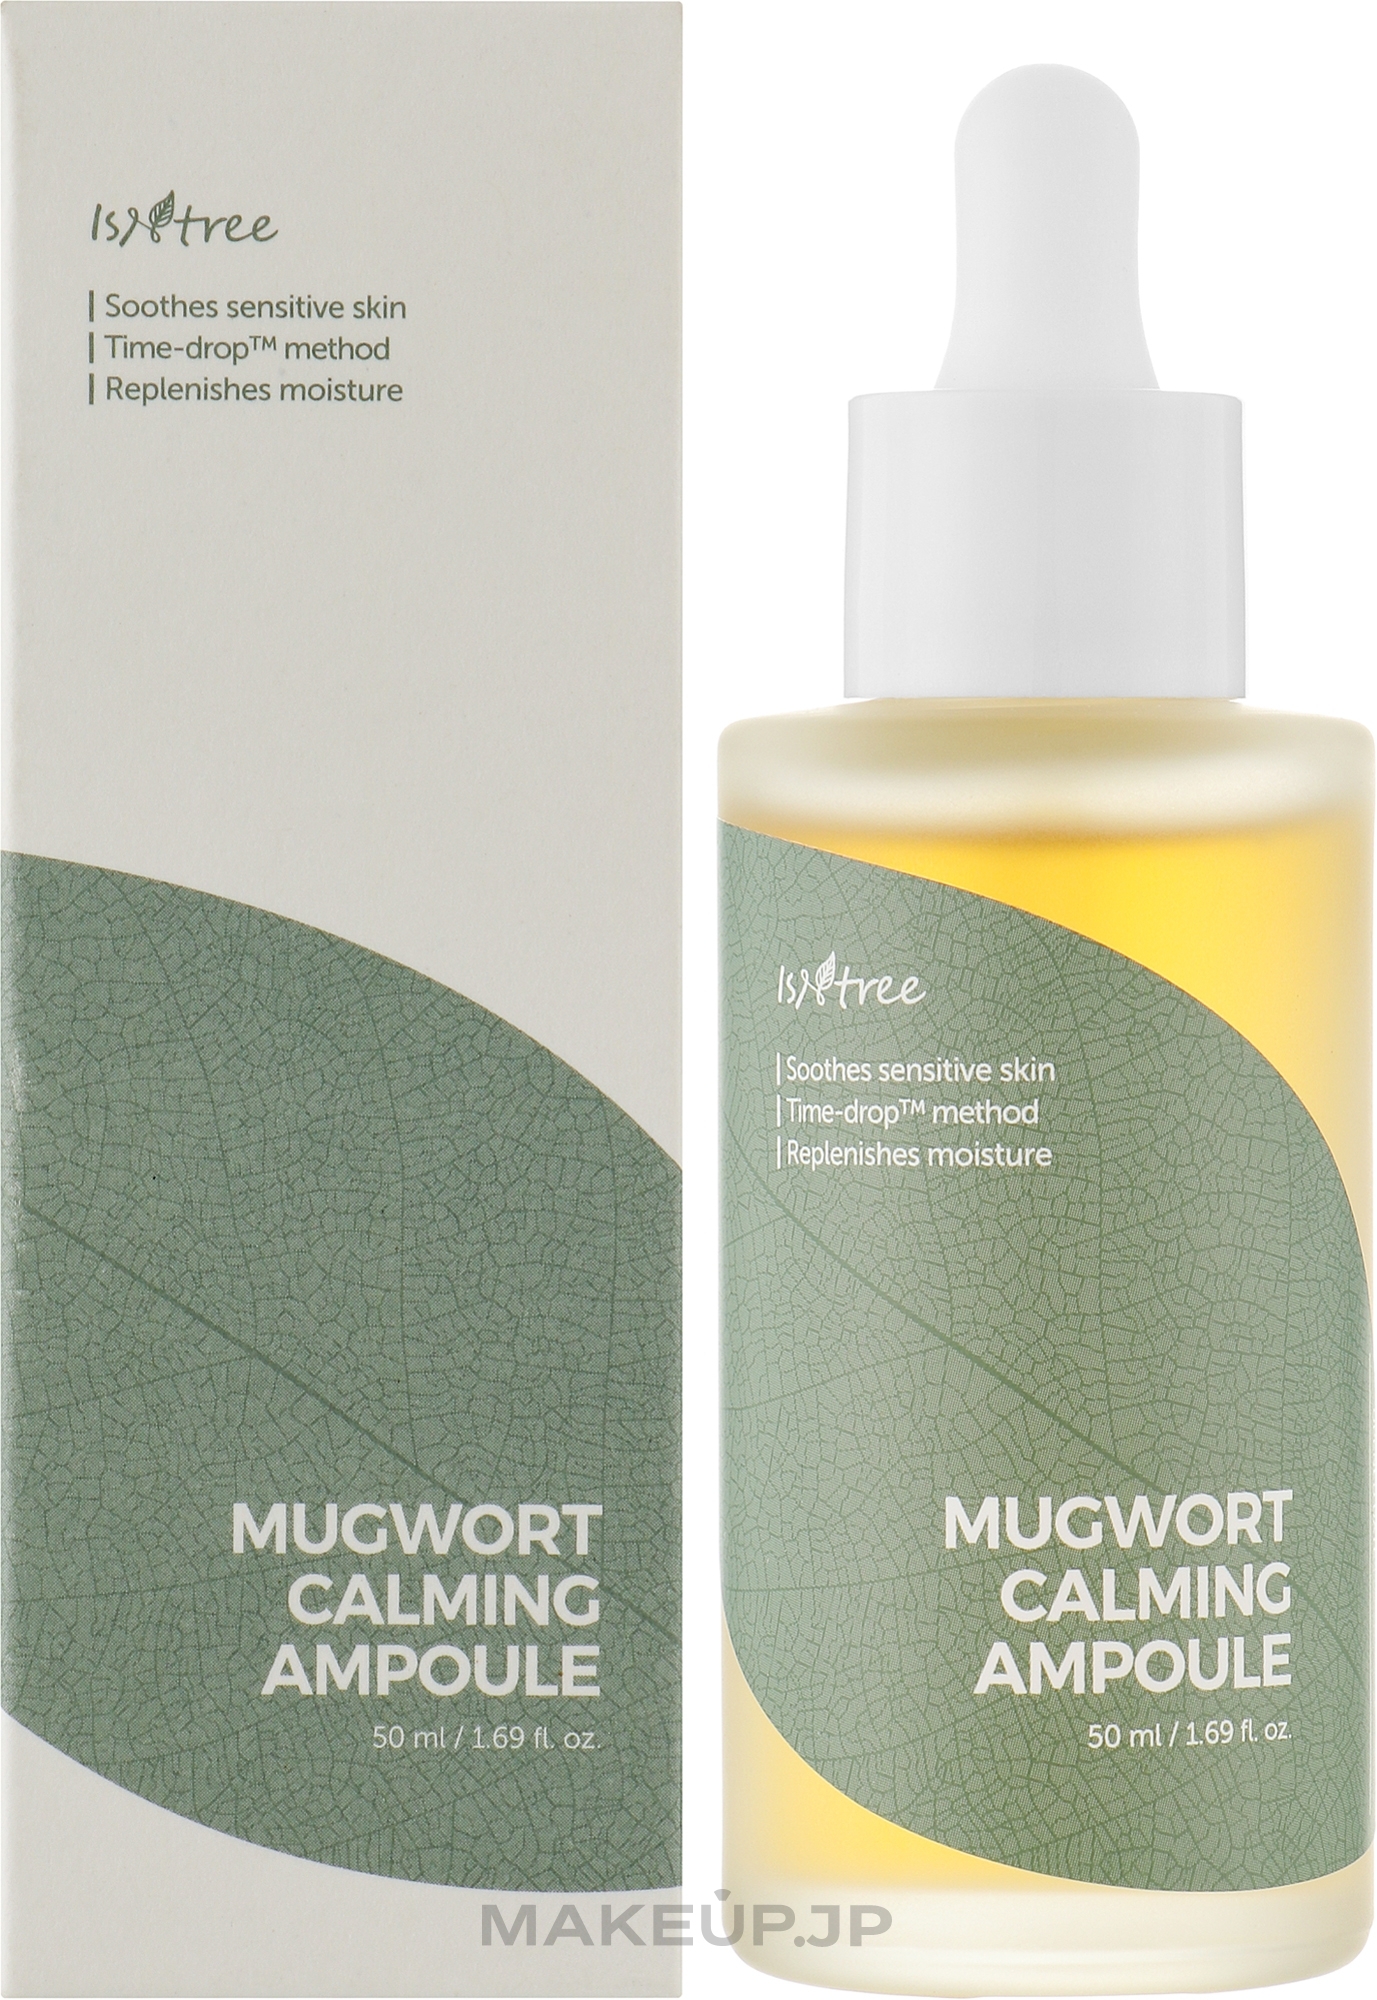 Soothing Face Serum - Isntree Mugwort Calming Ampoule — photo 50 ml